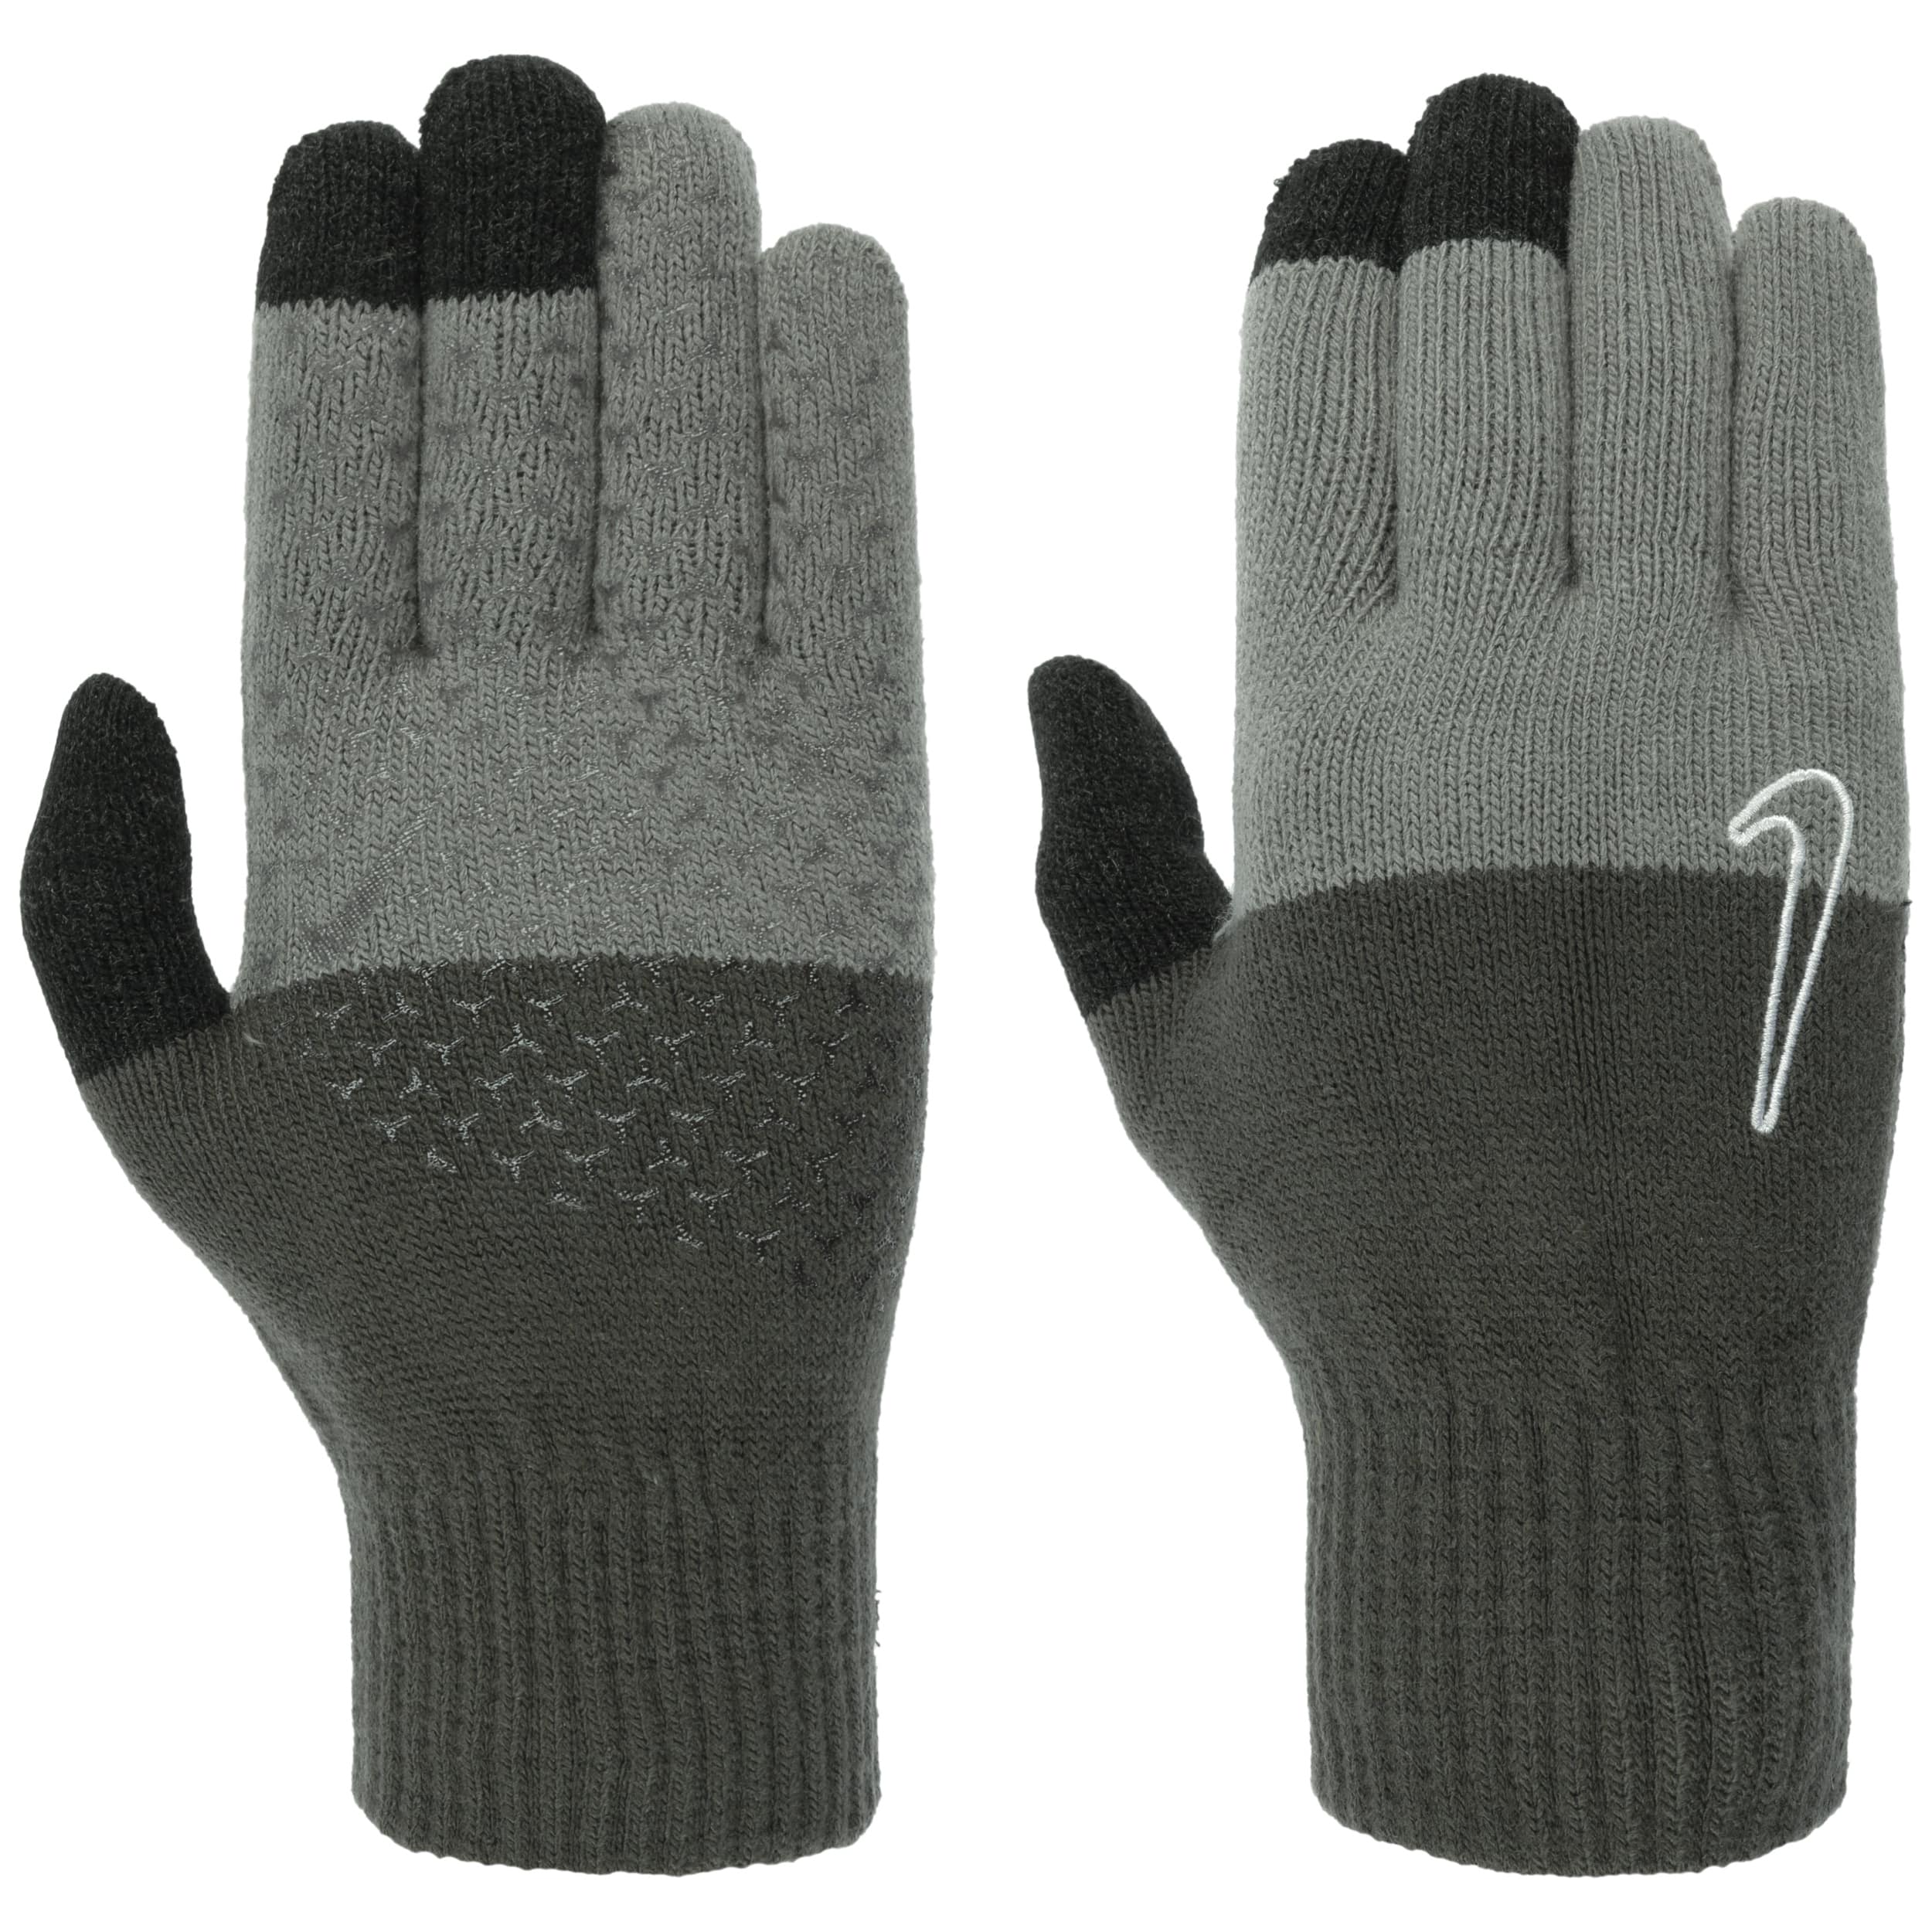 Knit Tech Graphic 25,95 TG Grip by - 2.0 Handschuhe € Nike